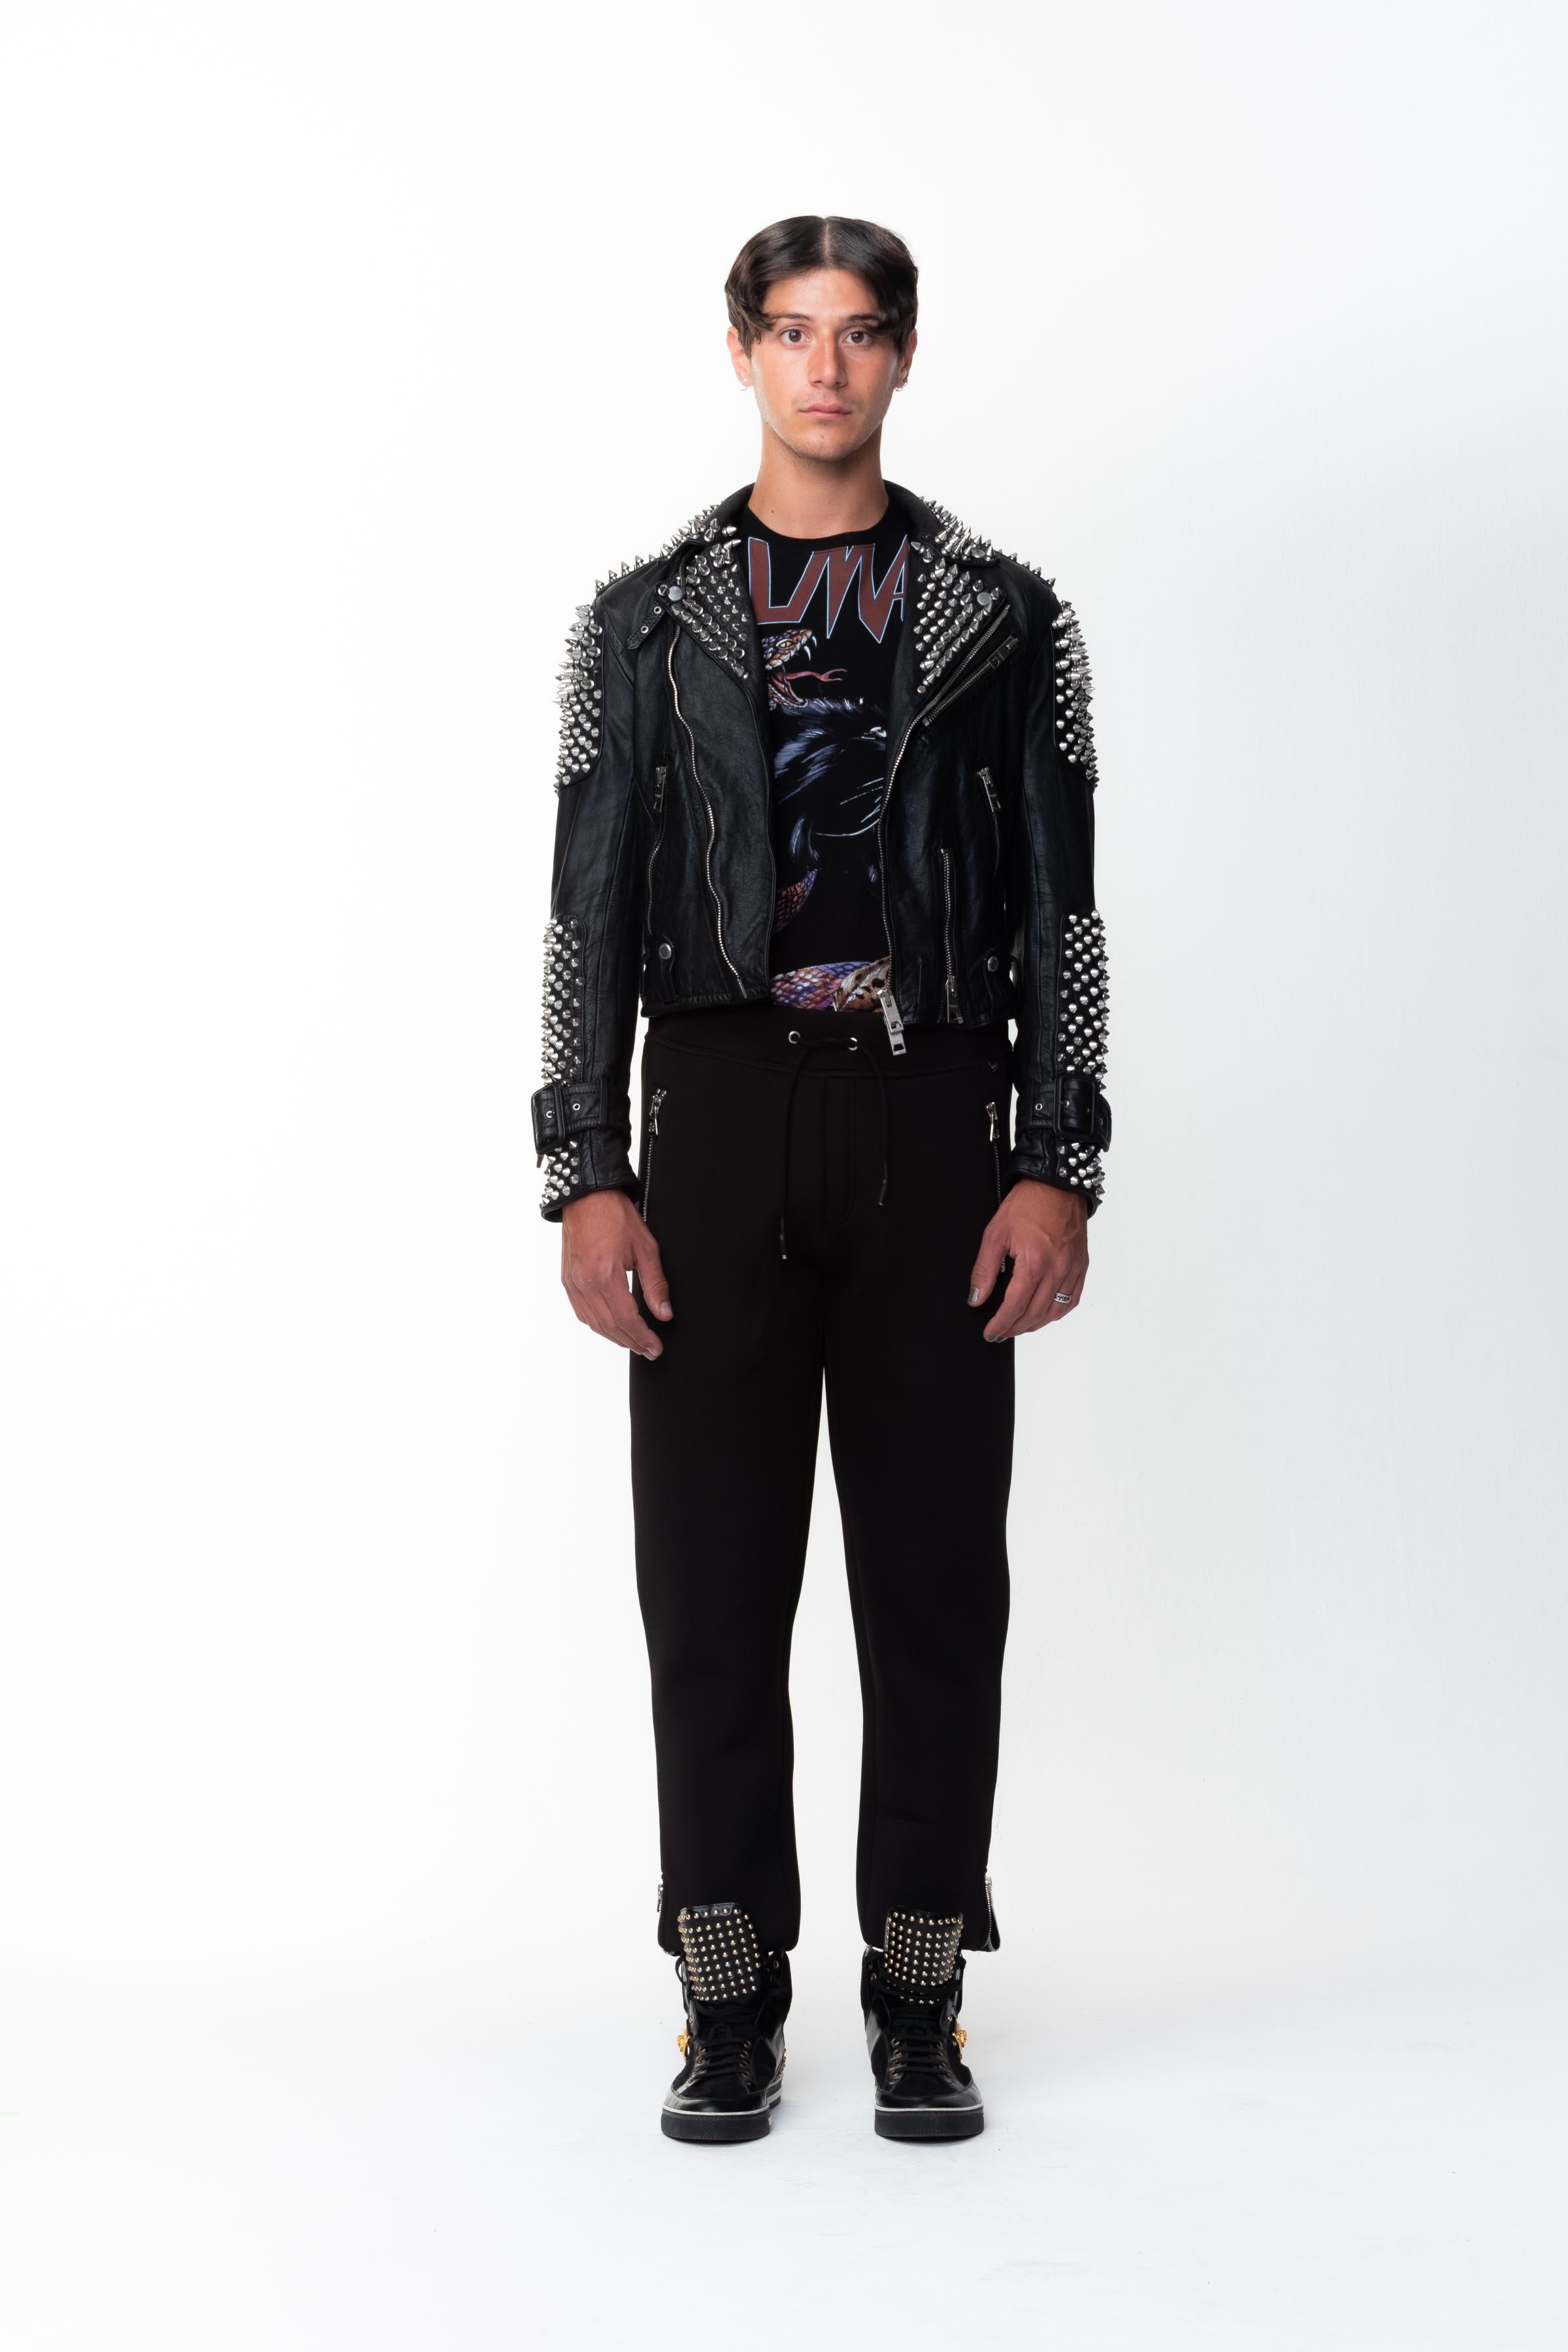 Burberry prorsum spike studded leather biker jacket. From 2011 Runway collection features stud detailing and a high quality calf leather frame. This is a super cool piece that was from Christopher Bailey's most talked about collection for Burberry.